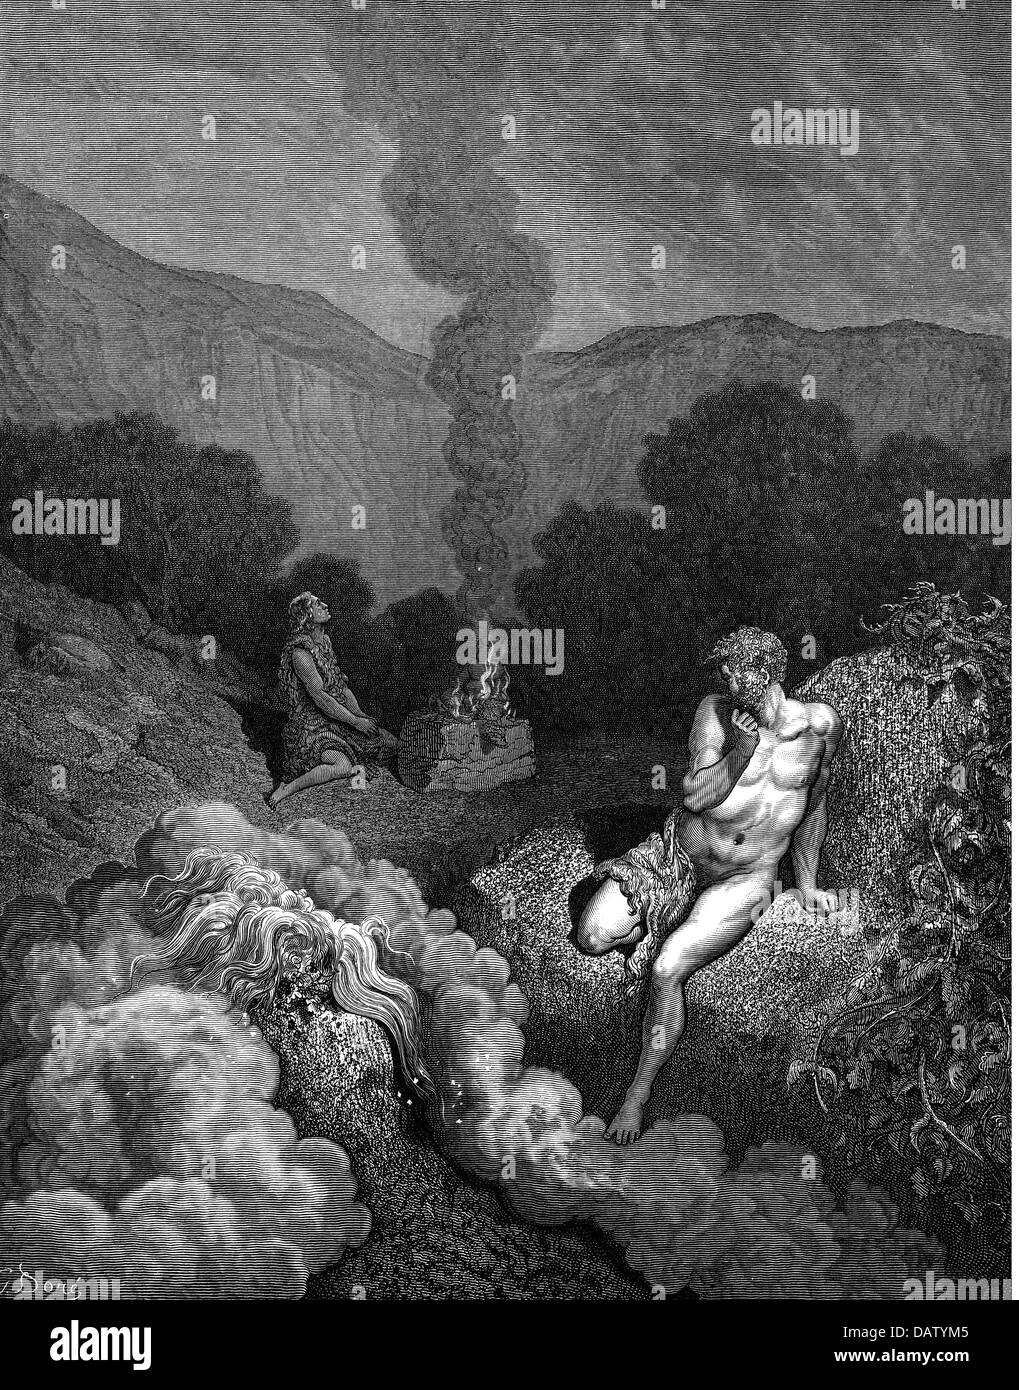 Cain and abel offering Black and White Stock Photos & Images - Alamy